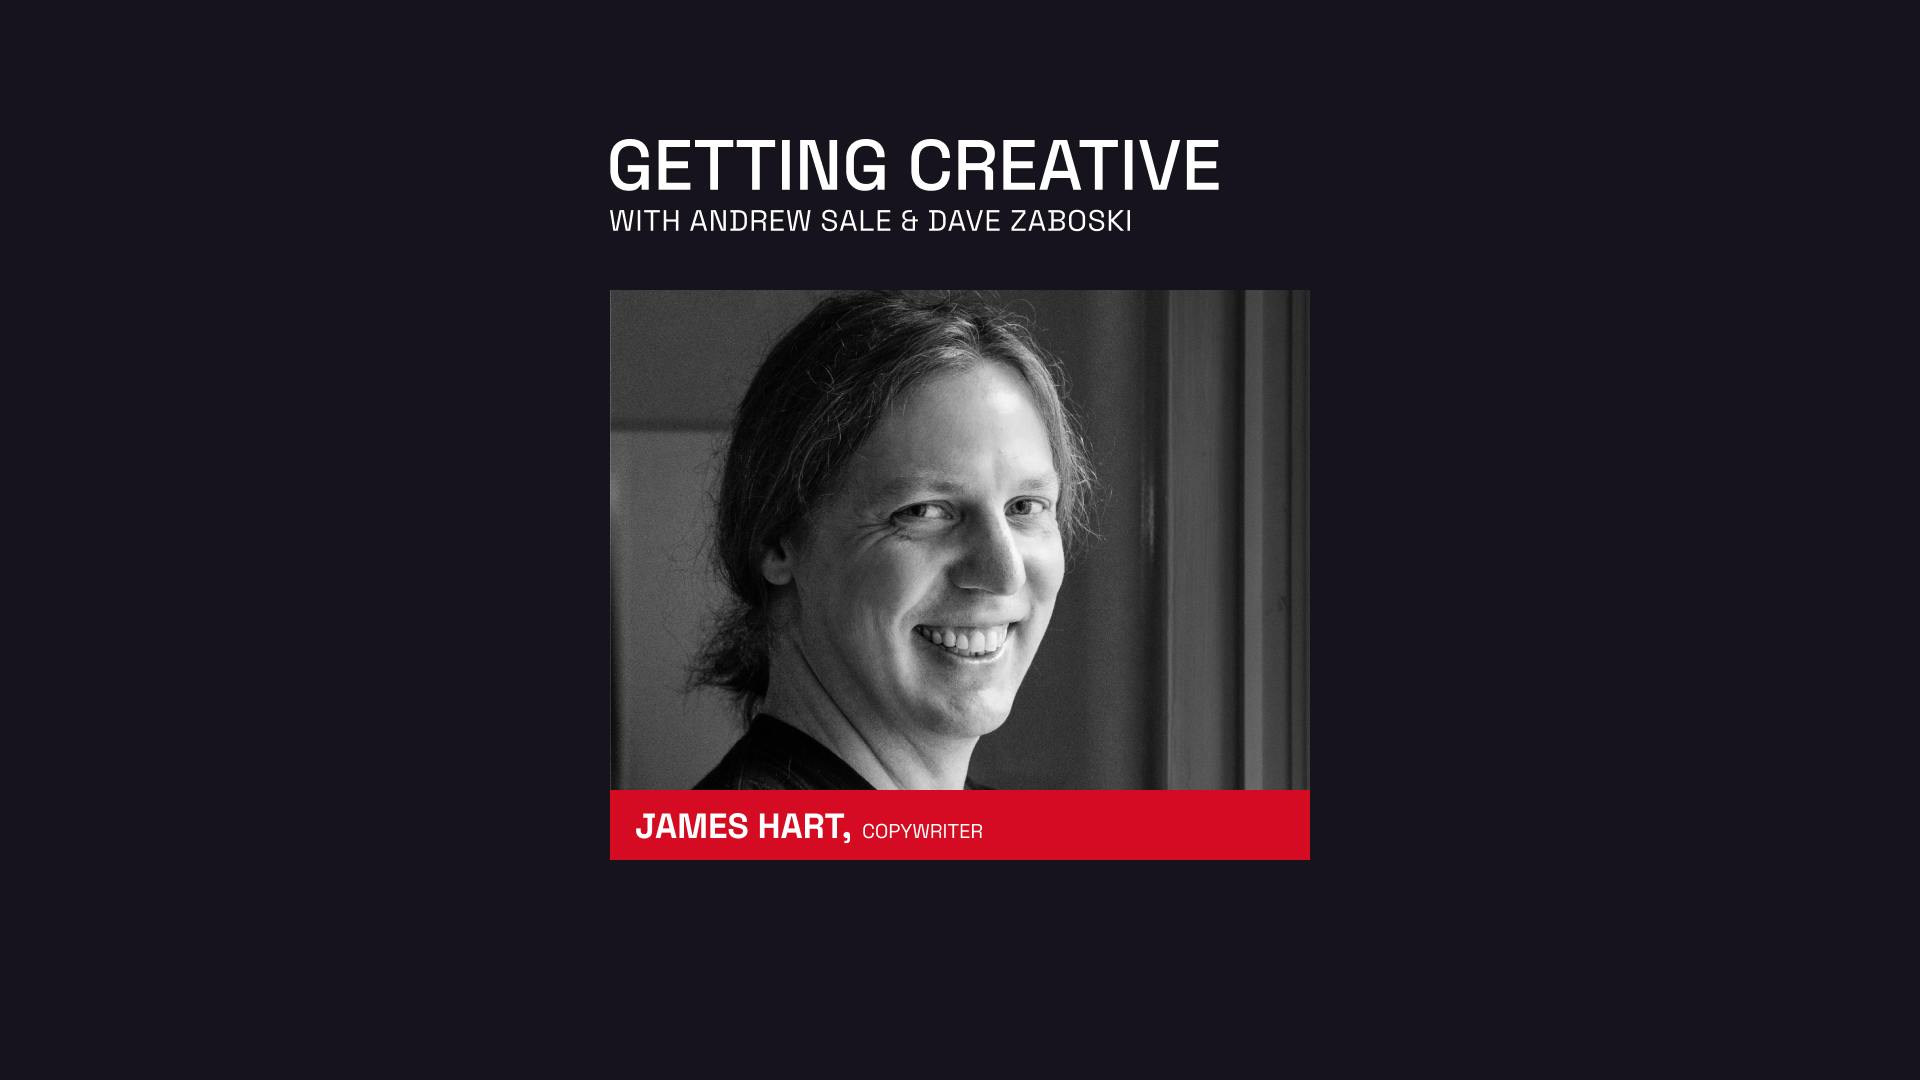 Image of guest James Hart for podcast episode.